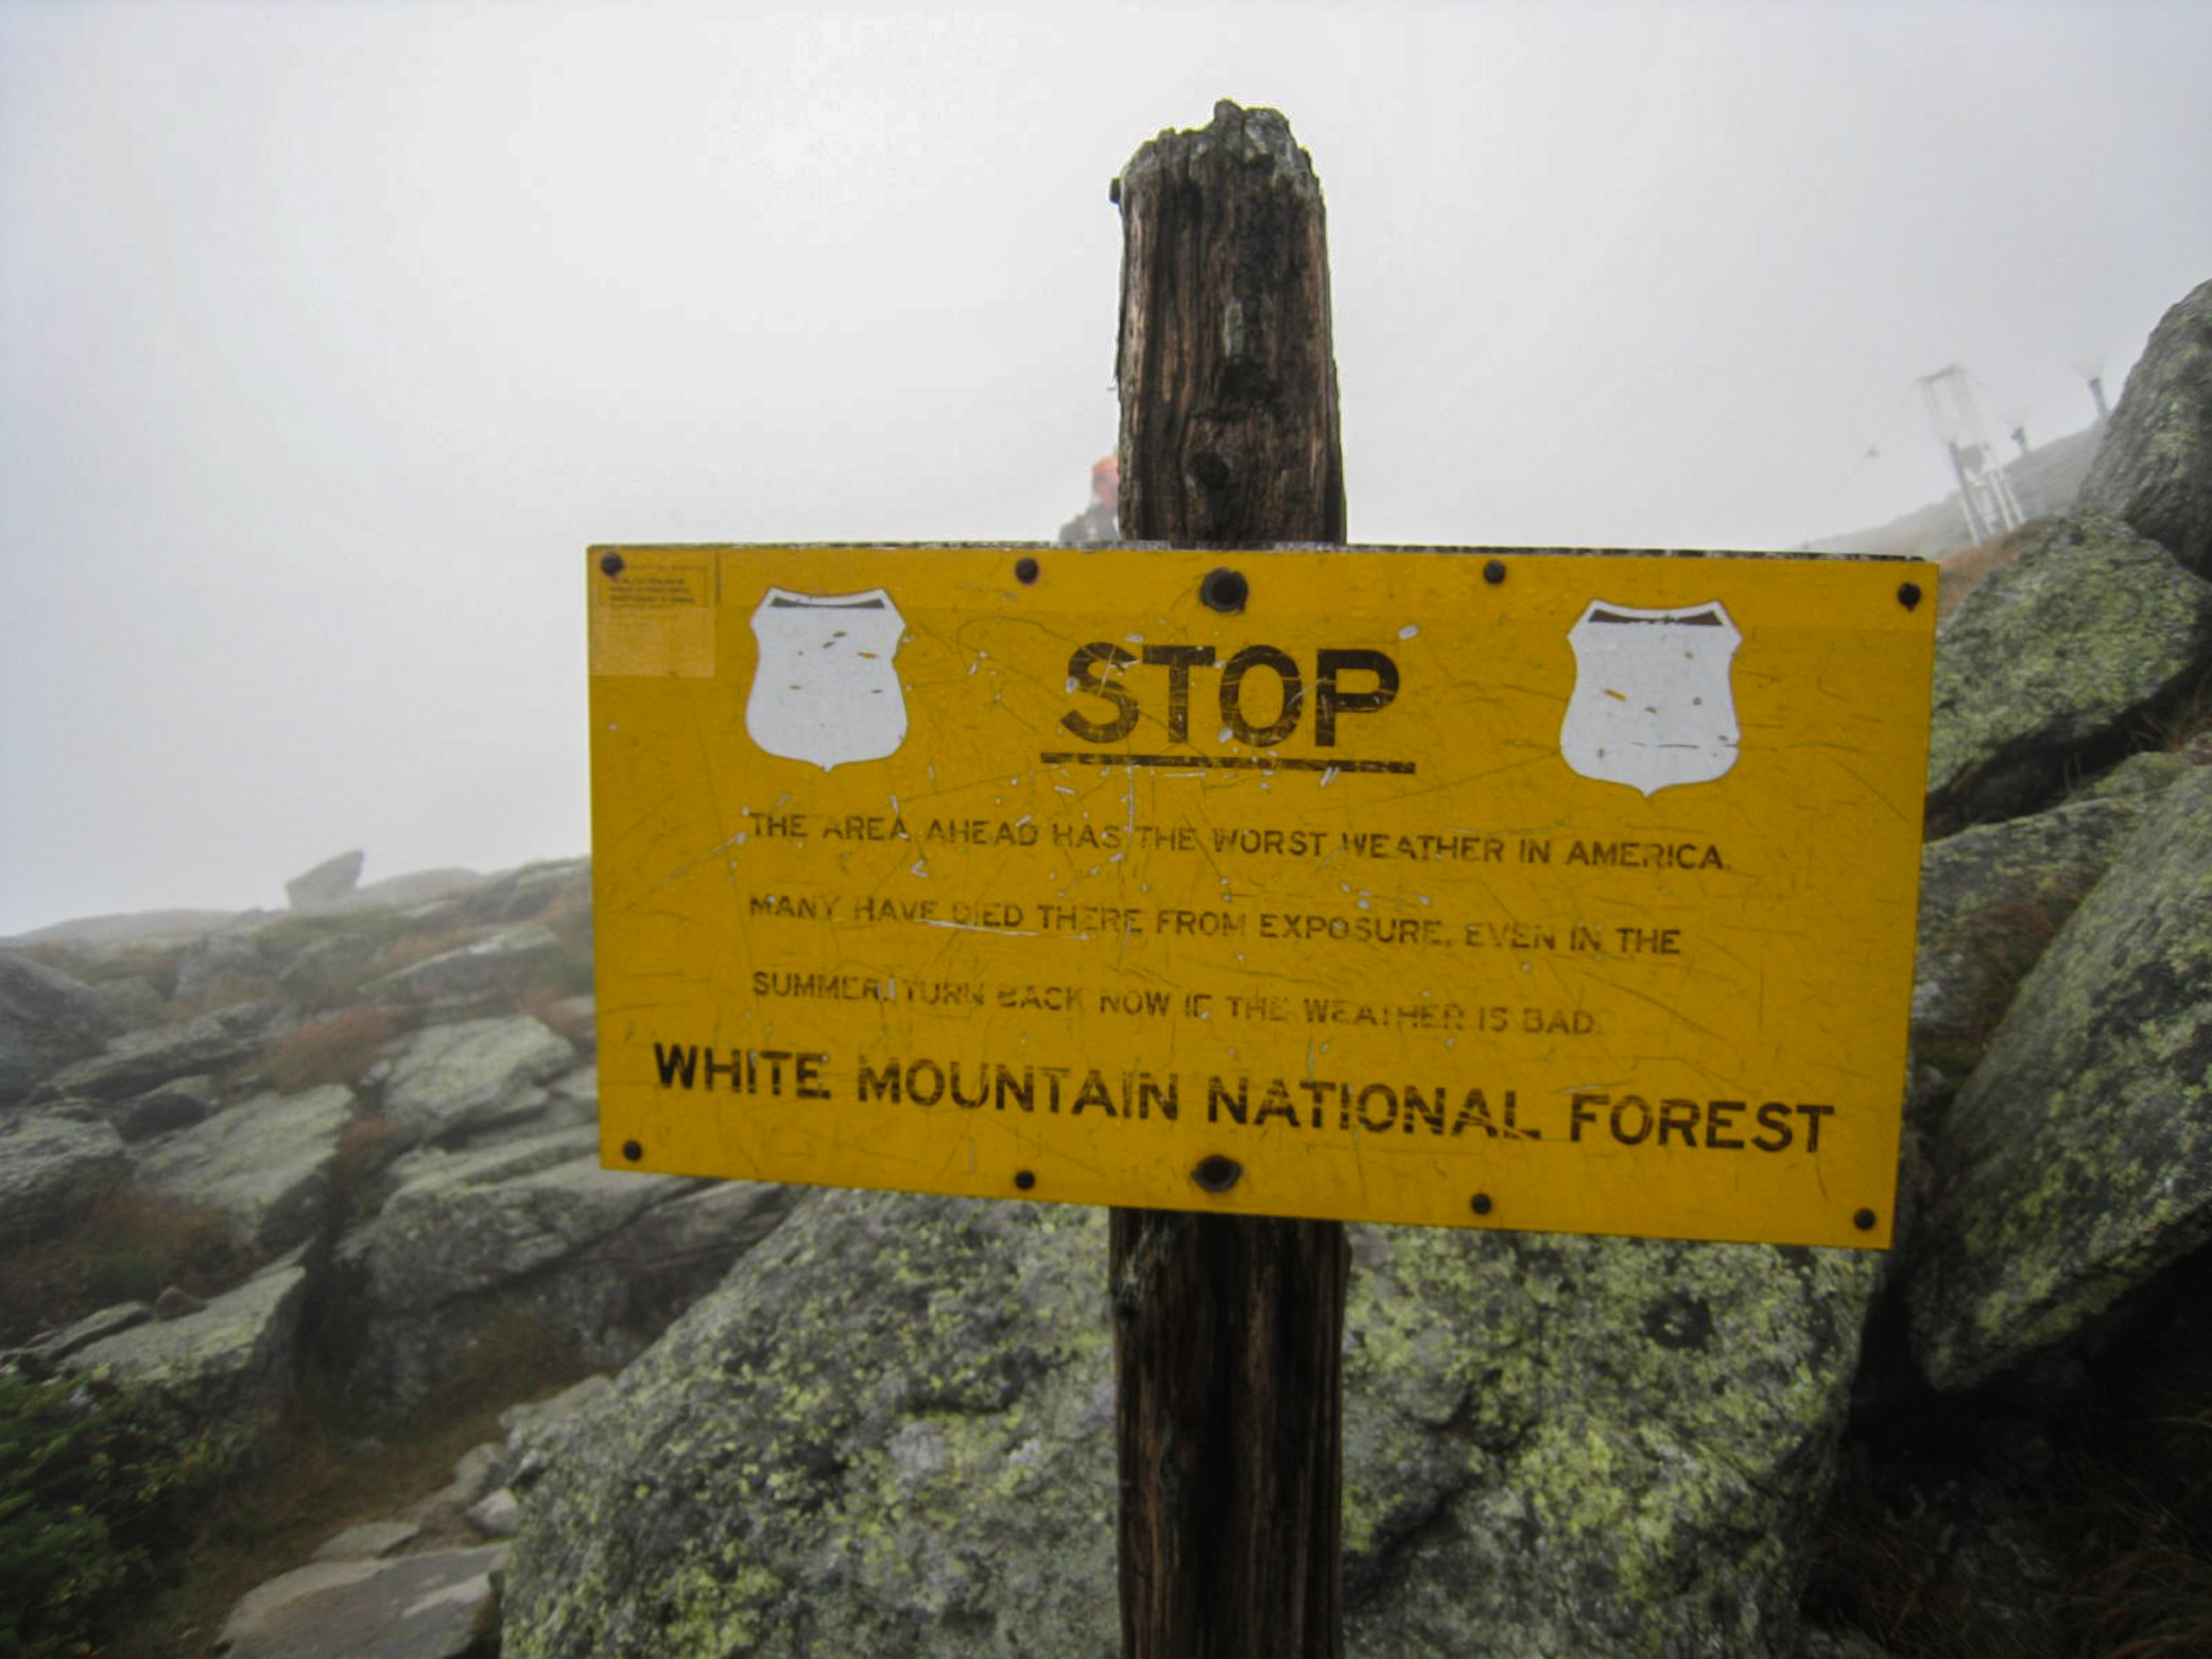 A sign on Mount Washington warns hikers that they will encounter the worst weather in America.